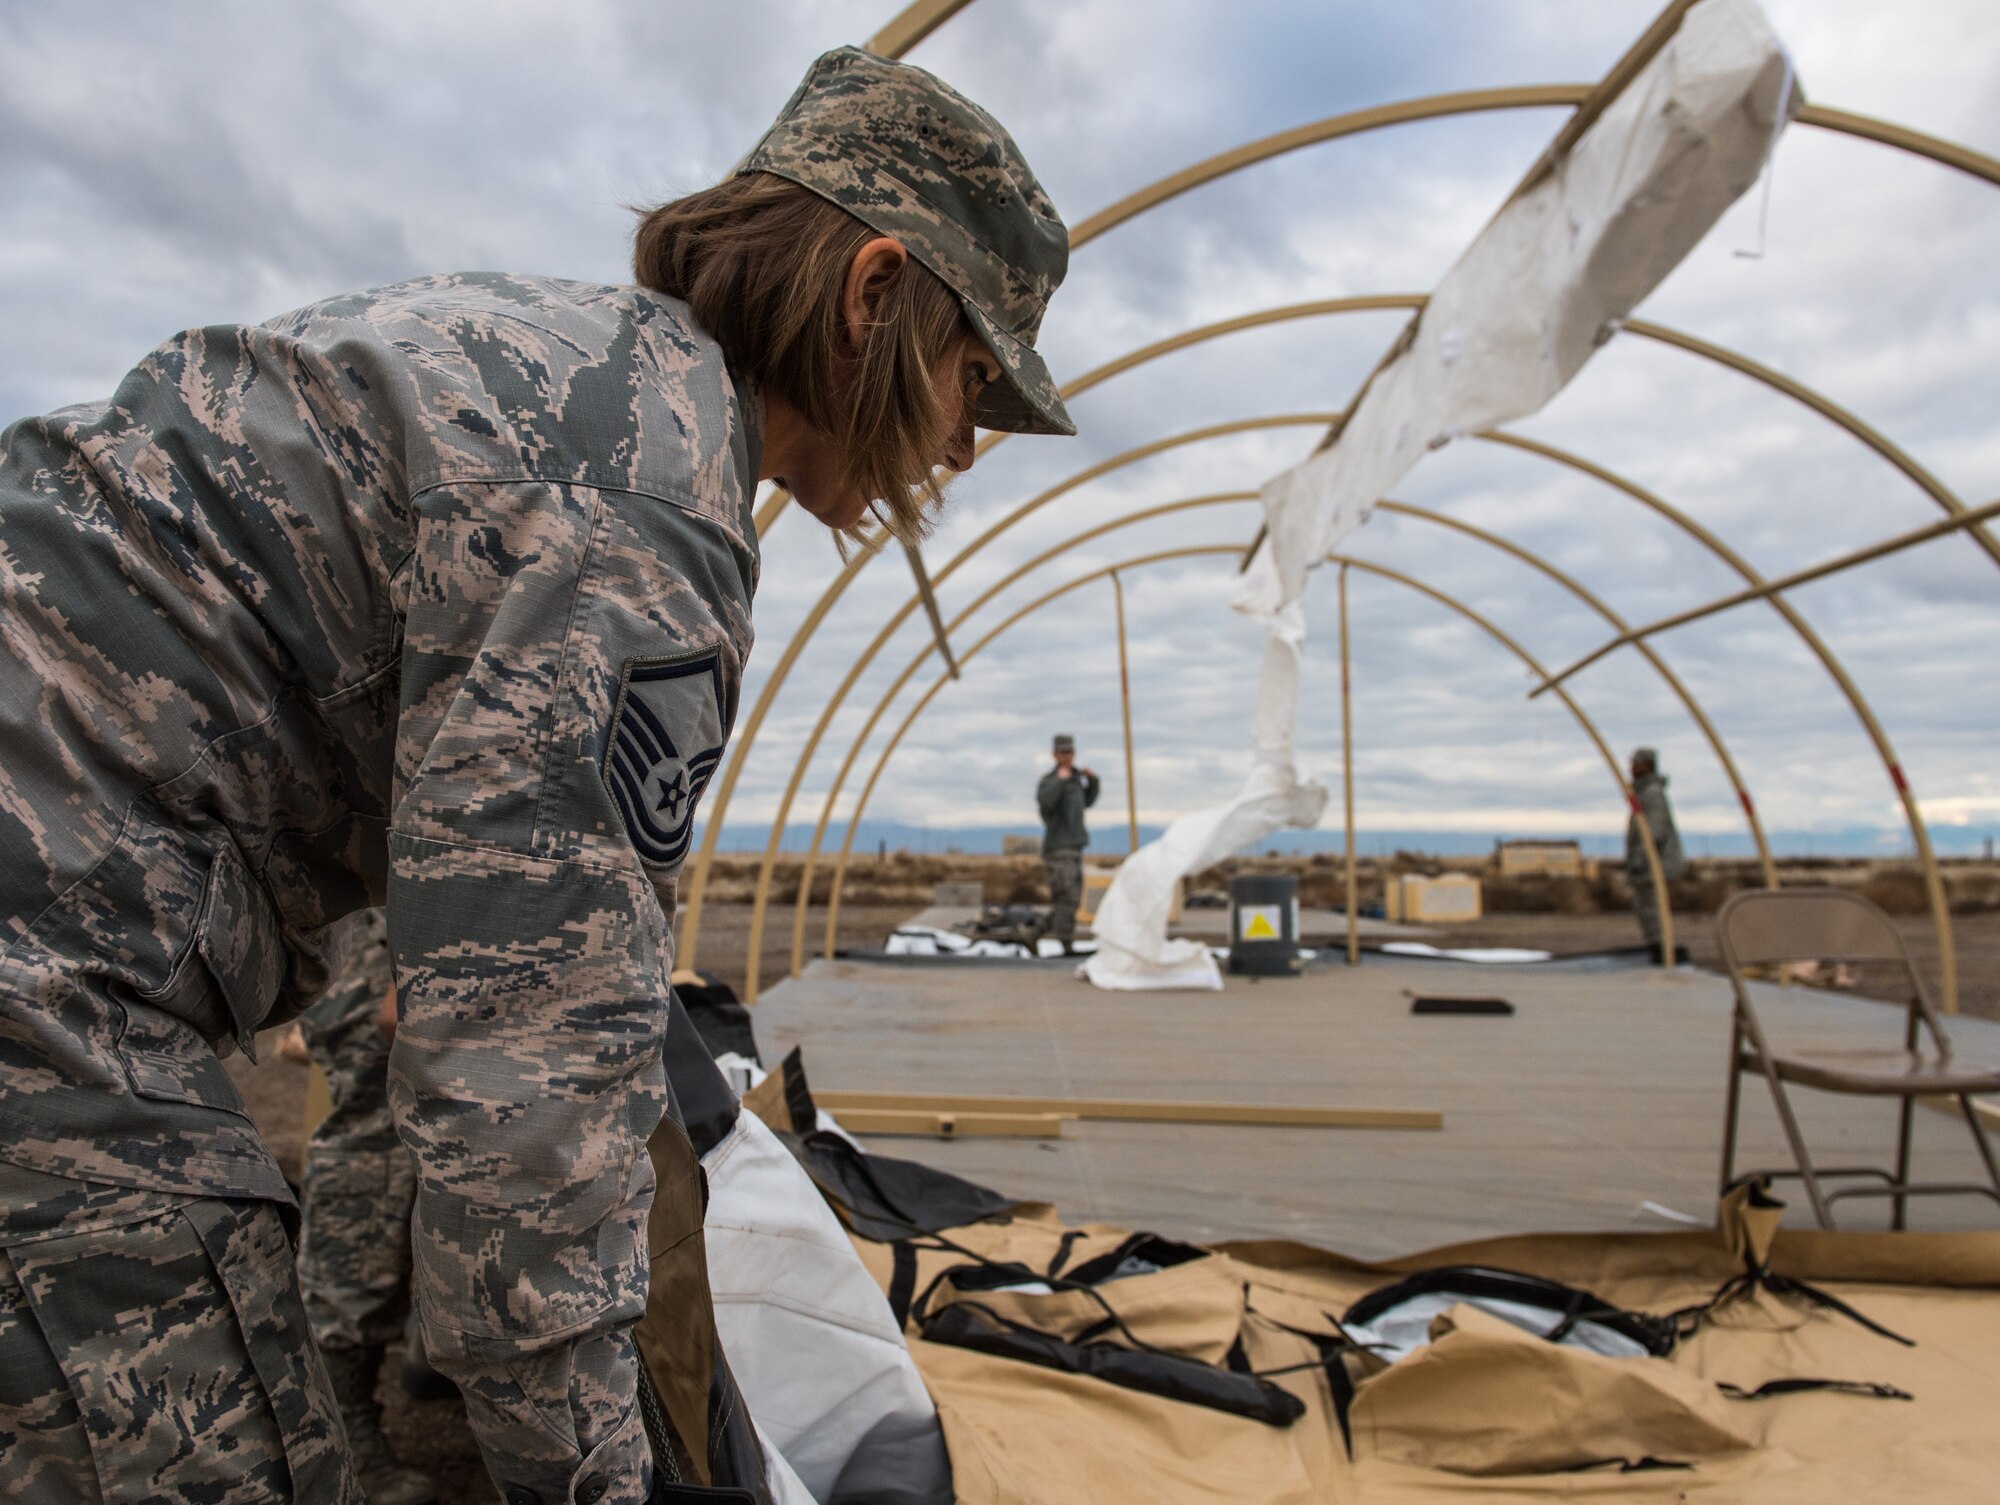 Master Sgt. Ann Mitchell, 366th Force Support Squadron sustainment flight superintendent, deconstructs an Alaskan SSS multi-purpose tent during Gunfighter Flag 16-1, Nov. 6, 2015, at Mountain Home Air Force Base, Idaho. The tents provide shelter for lodging, food preparation and briefings areas. (U.S. Air Force photo by Airman 1st Class Connor J. Marth)